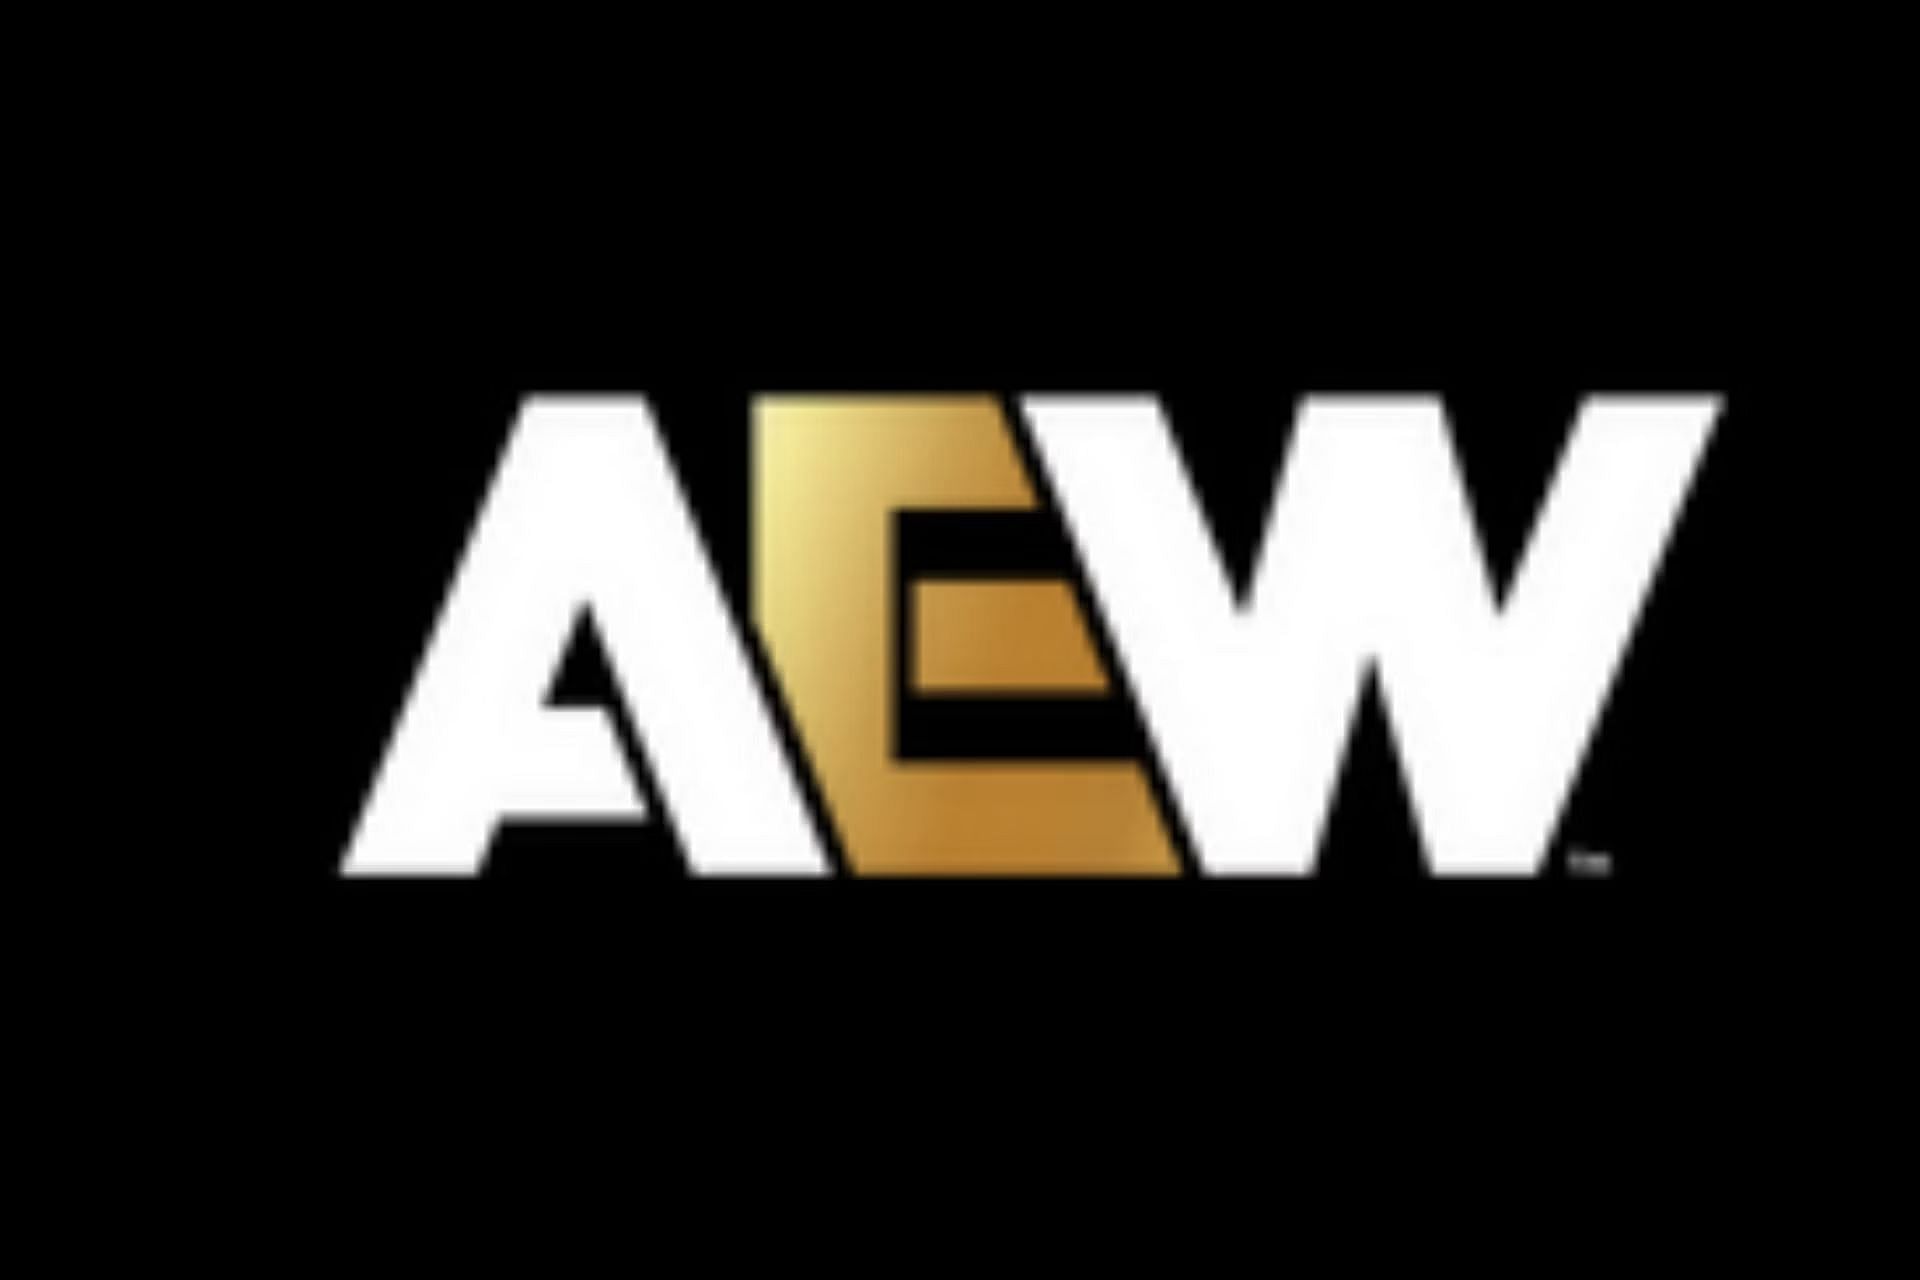 AEW has some of the top stars in the industry. (Photo credit: All Elite Wrestling